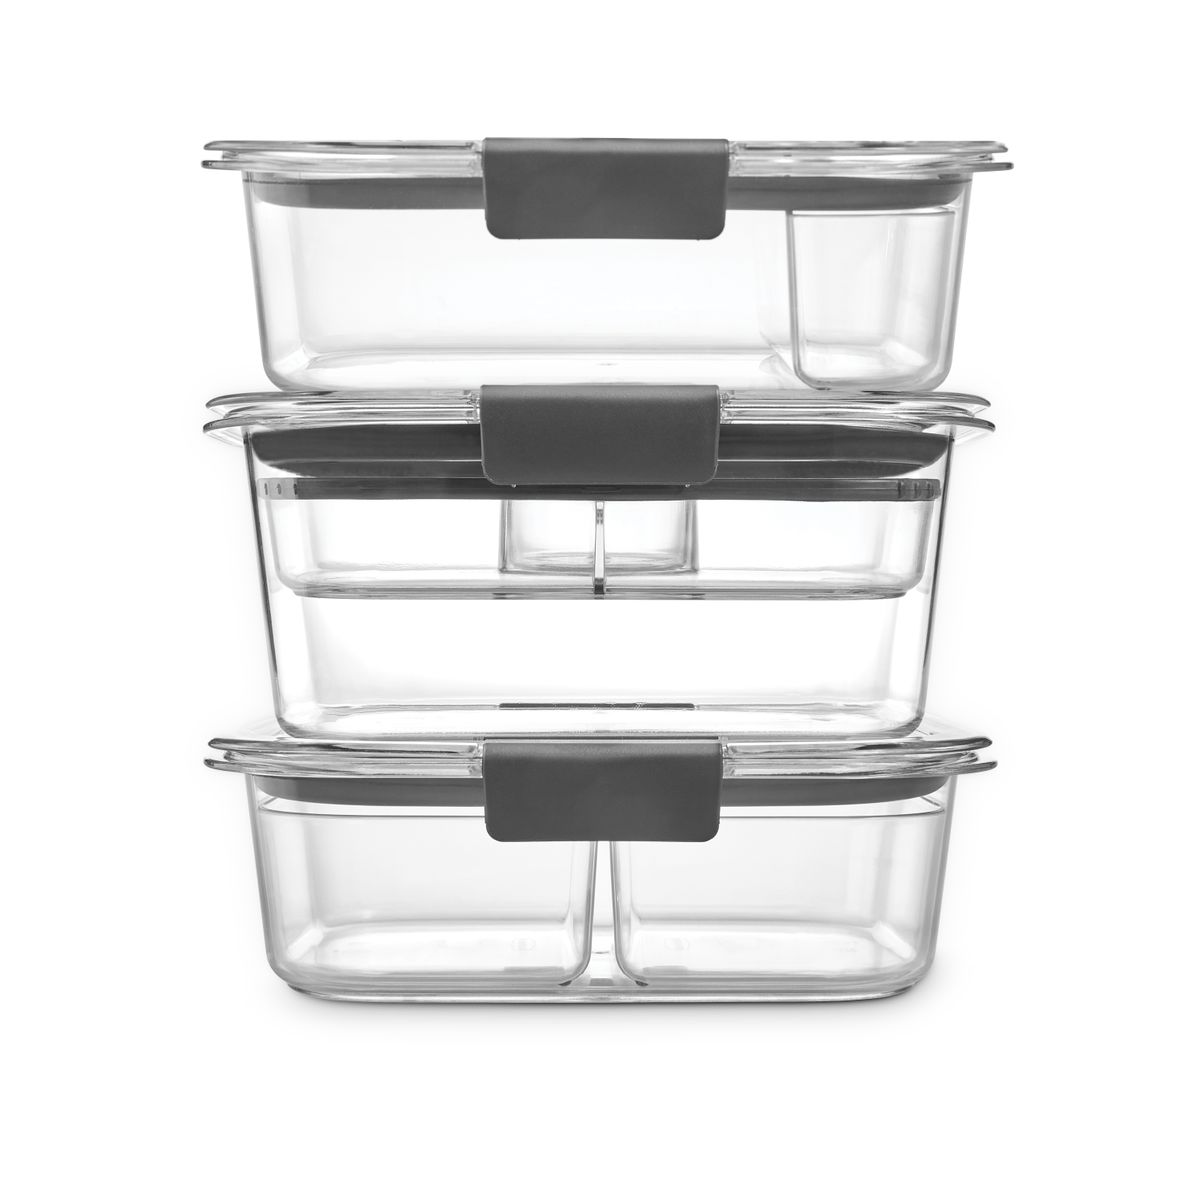 [RDY] [送料無料] Rubbermaid Brilliance Food Storage Containers, 12 Piece Sandwich and Salad Lunch Kit, Leak-Proof, BPA Free, Clear Tritan Plastic. [楽天海外通販] | Rubbermaid Brilliance Food Storage Containers, 12 Piece Sandwich and Salad Lunch